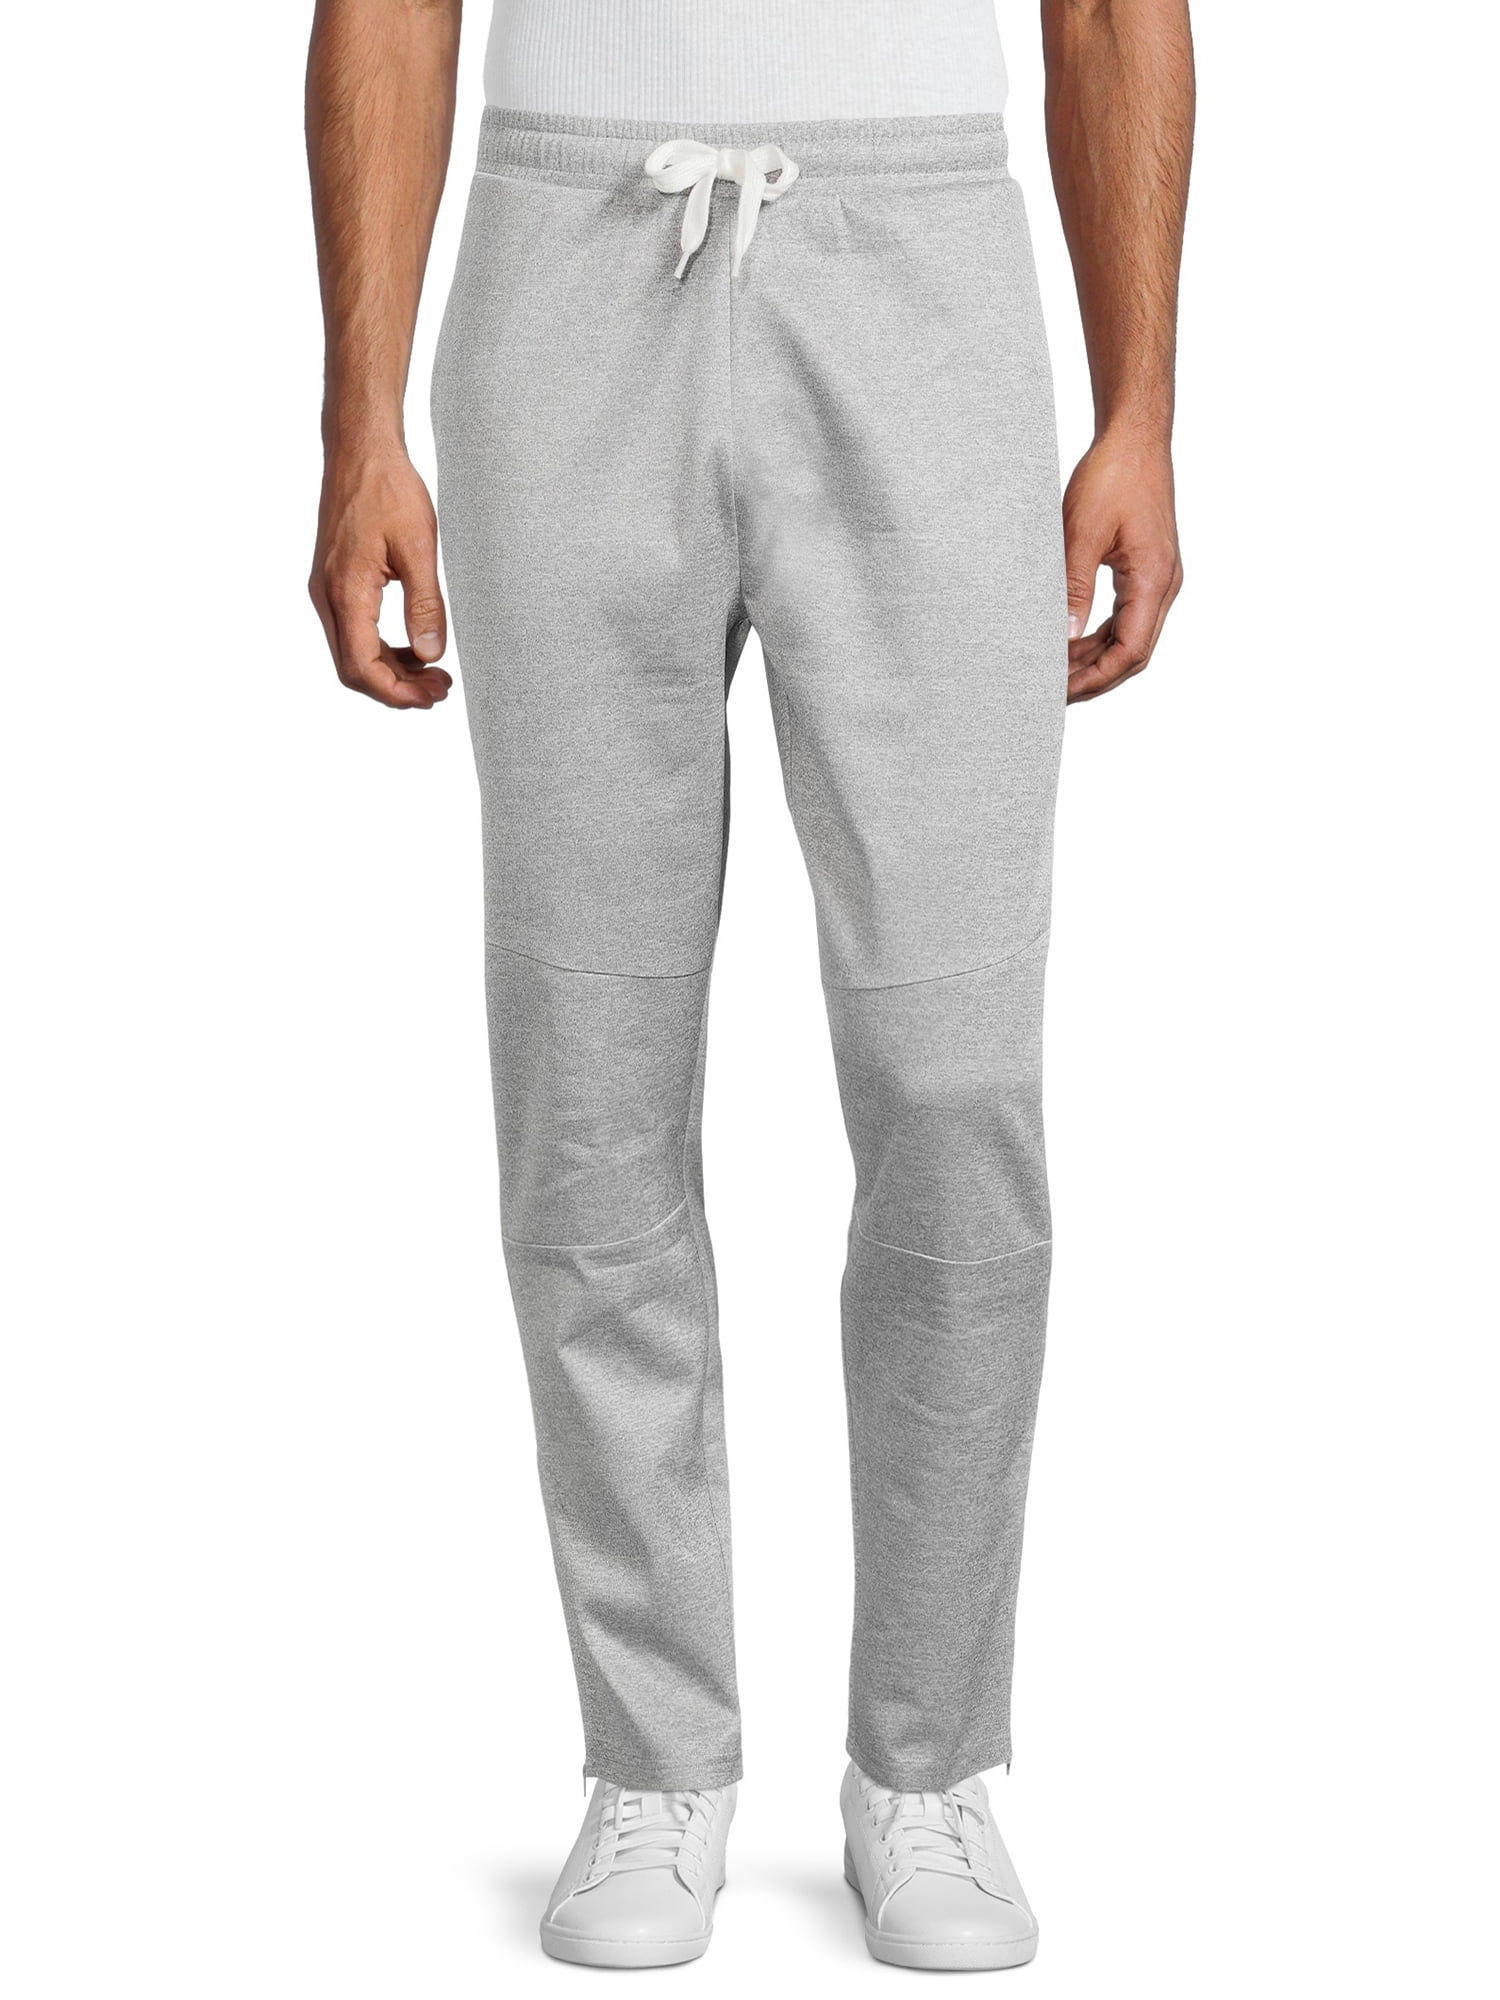 Unipro Men's Active Lightweight French Terry Solid Joggers - Walmart.com